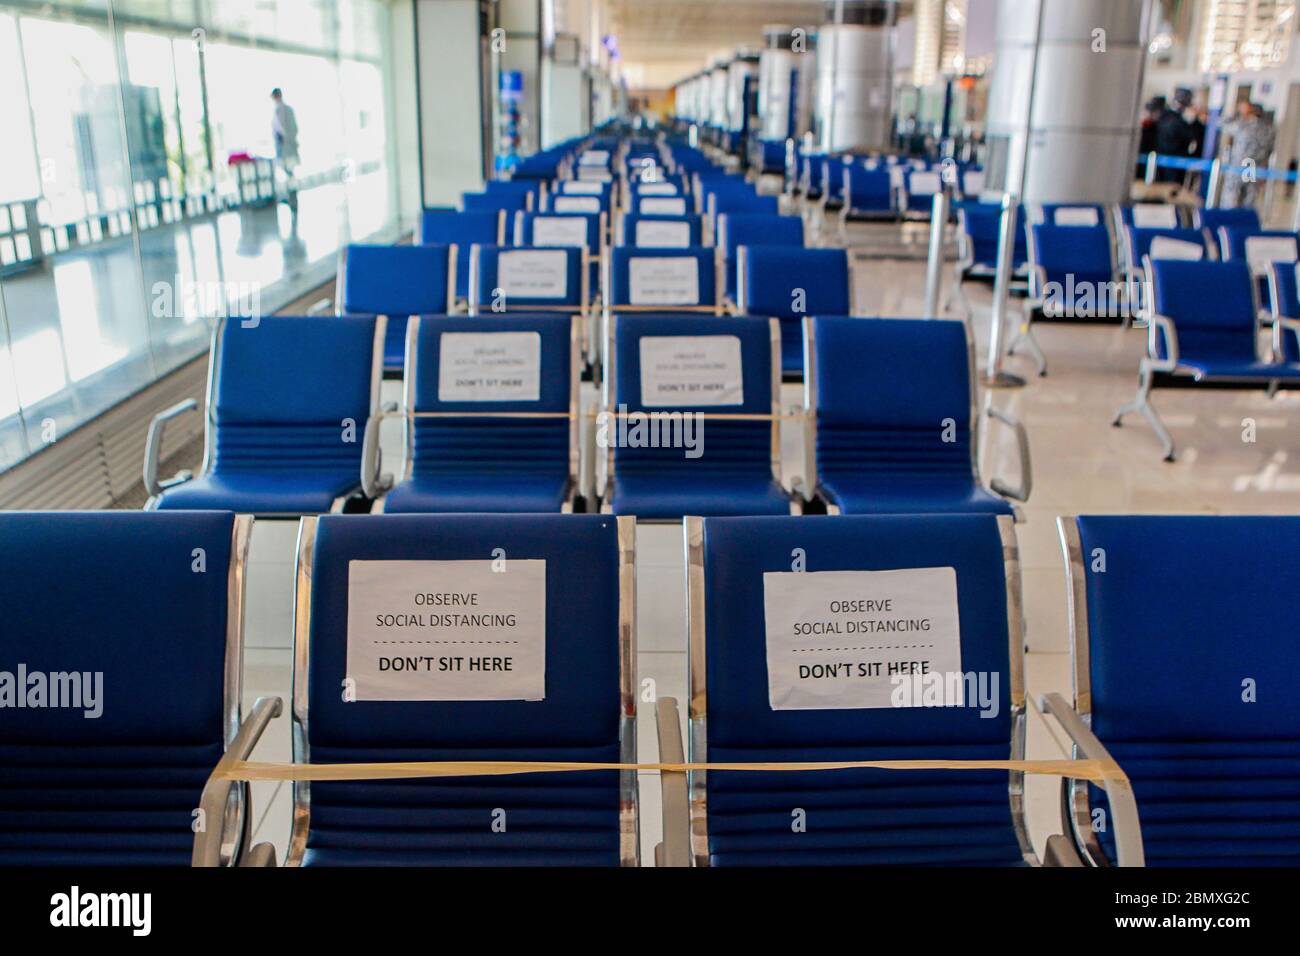 Manila. 11th May, 2020. Social distancing signs are placed on seats at the Manila Ninoy Aquino International Airport in the Philippines, May 11, 2020. All foreigners and Filipinos arriving in the Philippines need to undergo testing for the COVID-19 and quarantine to stem the spread of the virus, Presidential spokesperson Harry Roque said on Monday. Credit: Rouelle Umali/Xinhua/Alamy Live News Stock Photo